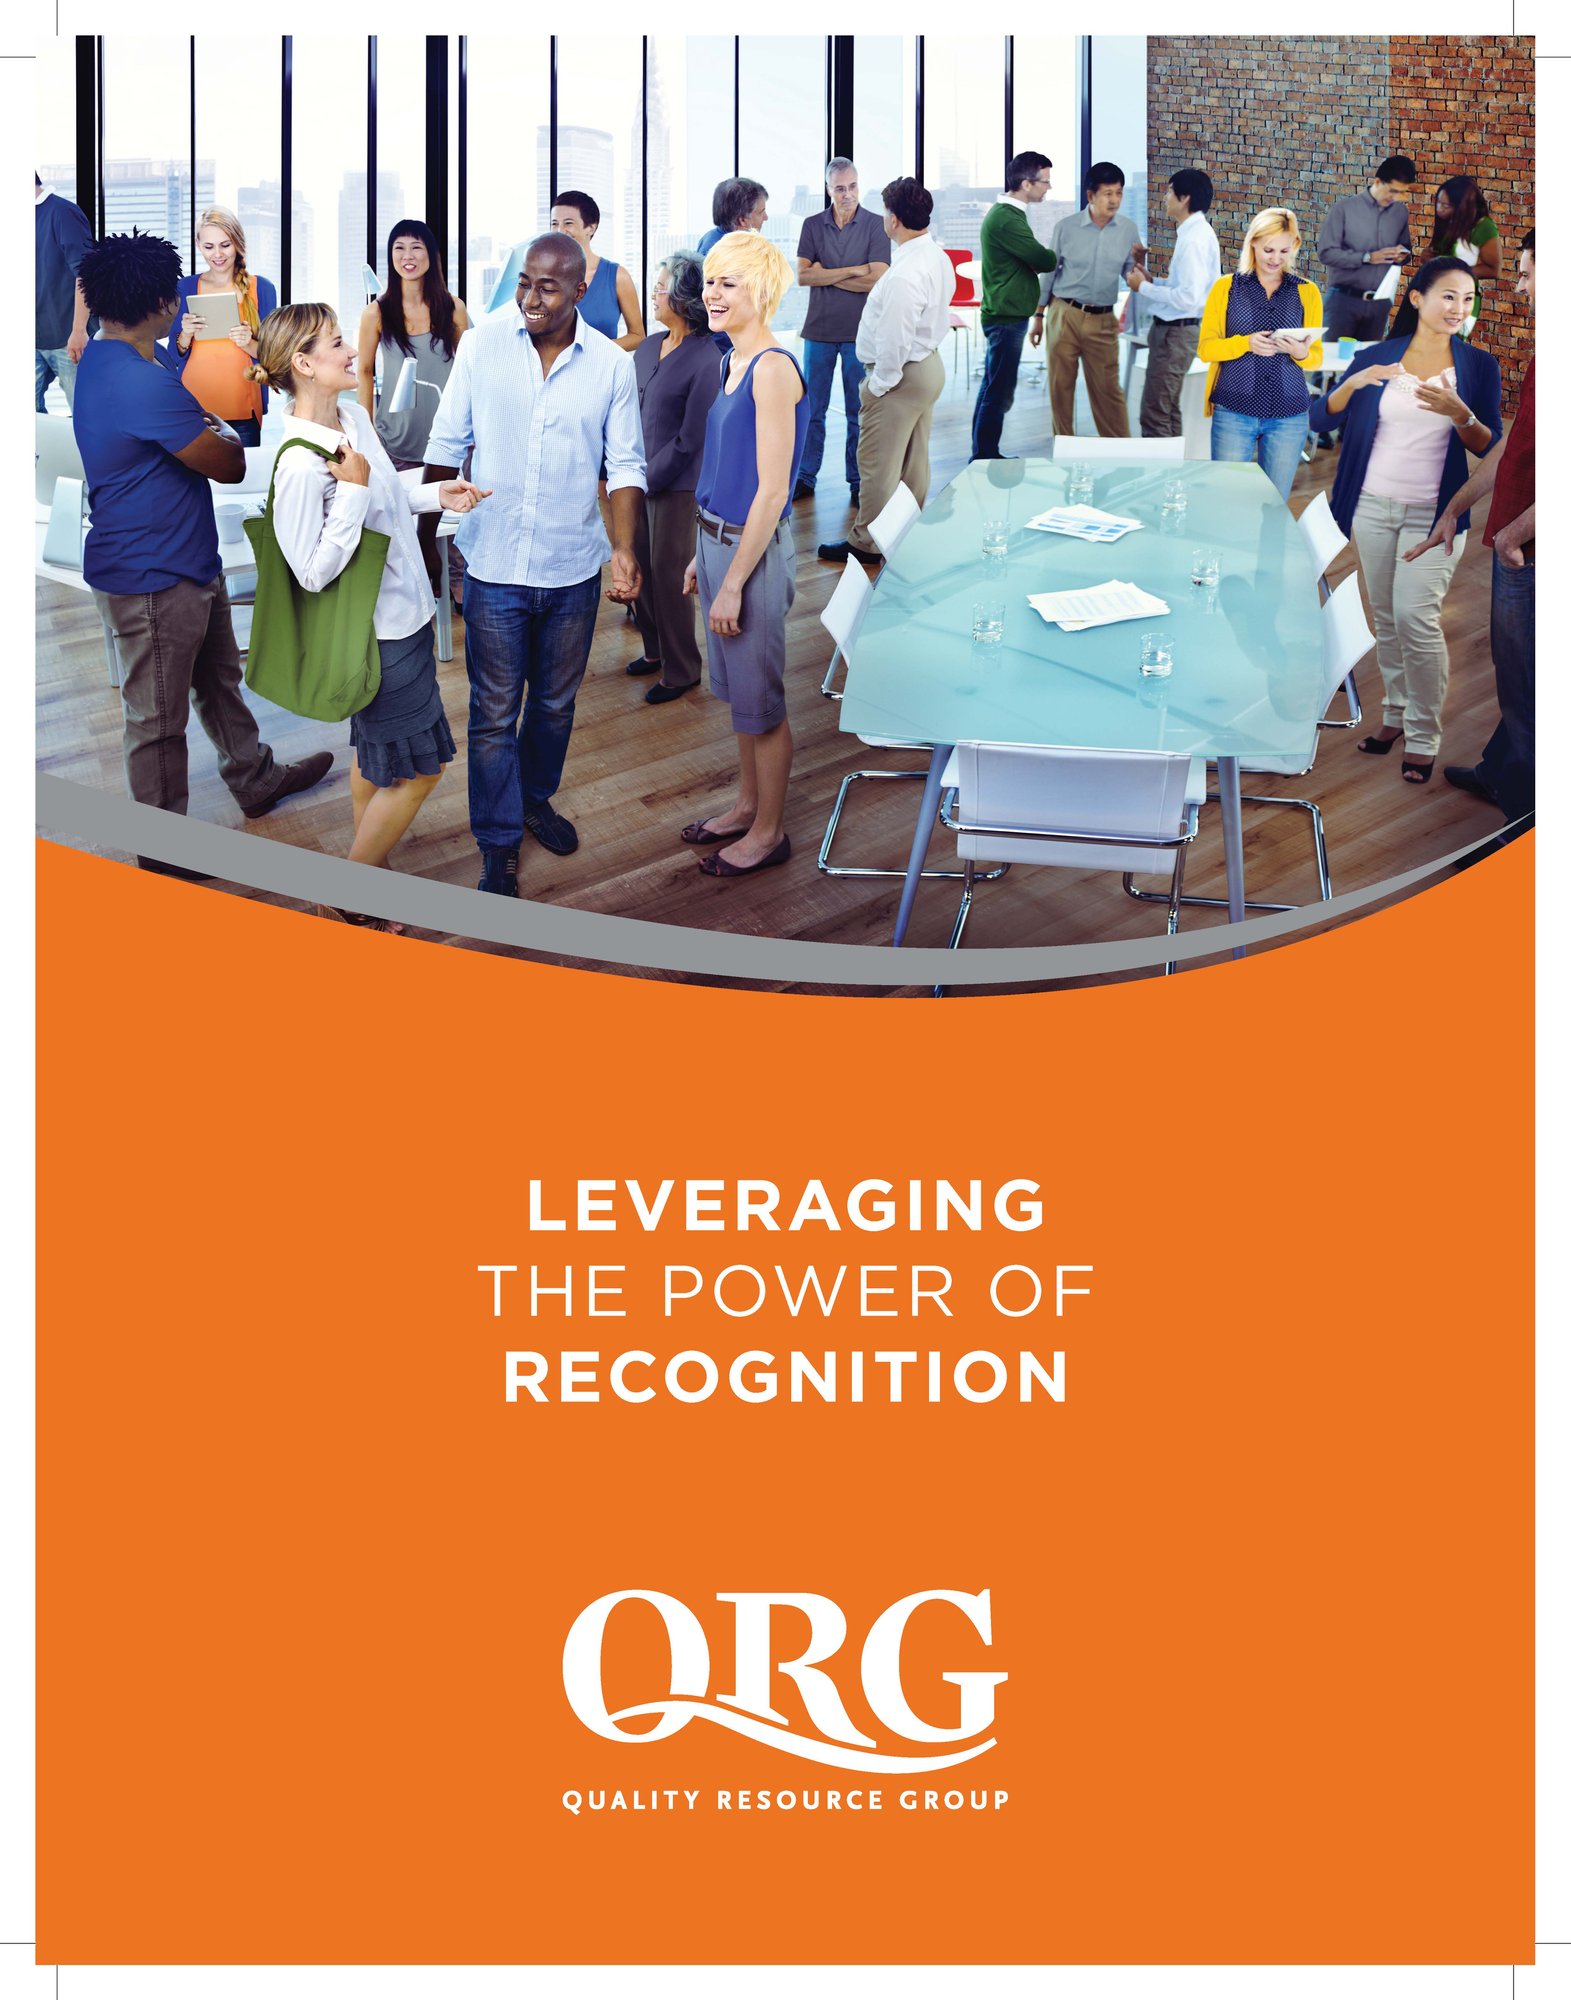 men and women networking in a conference room - Leveraging the Power of Recognition cover